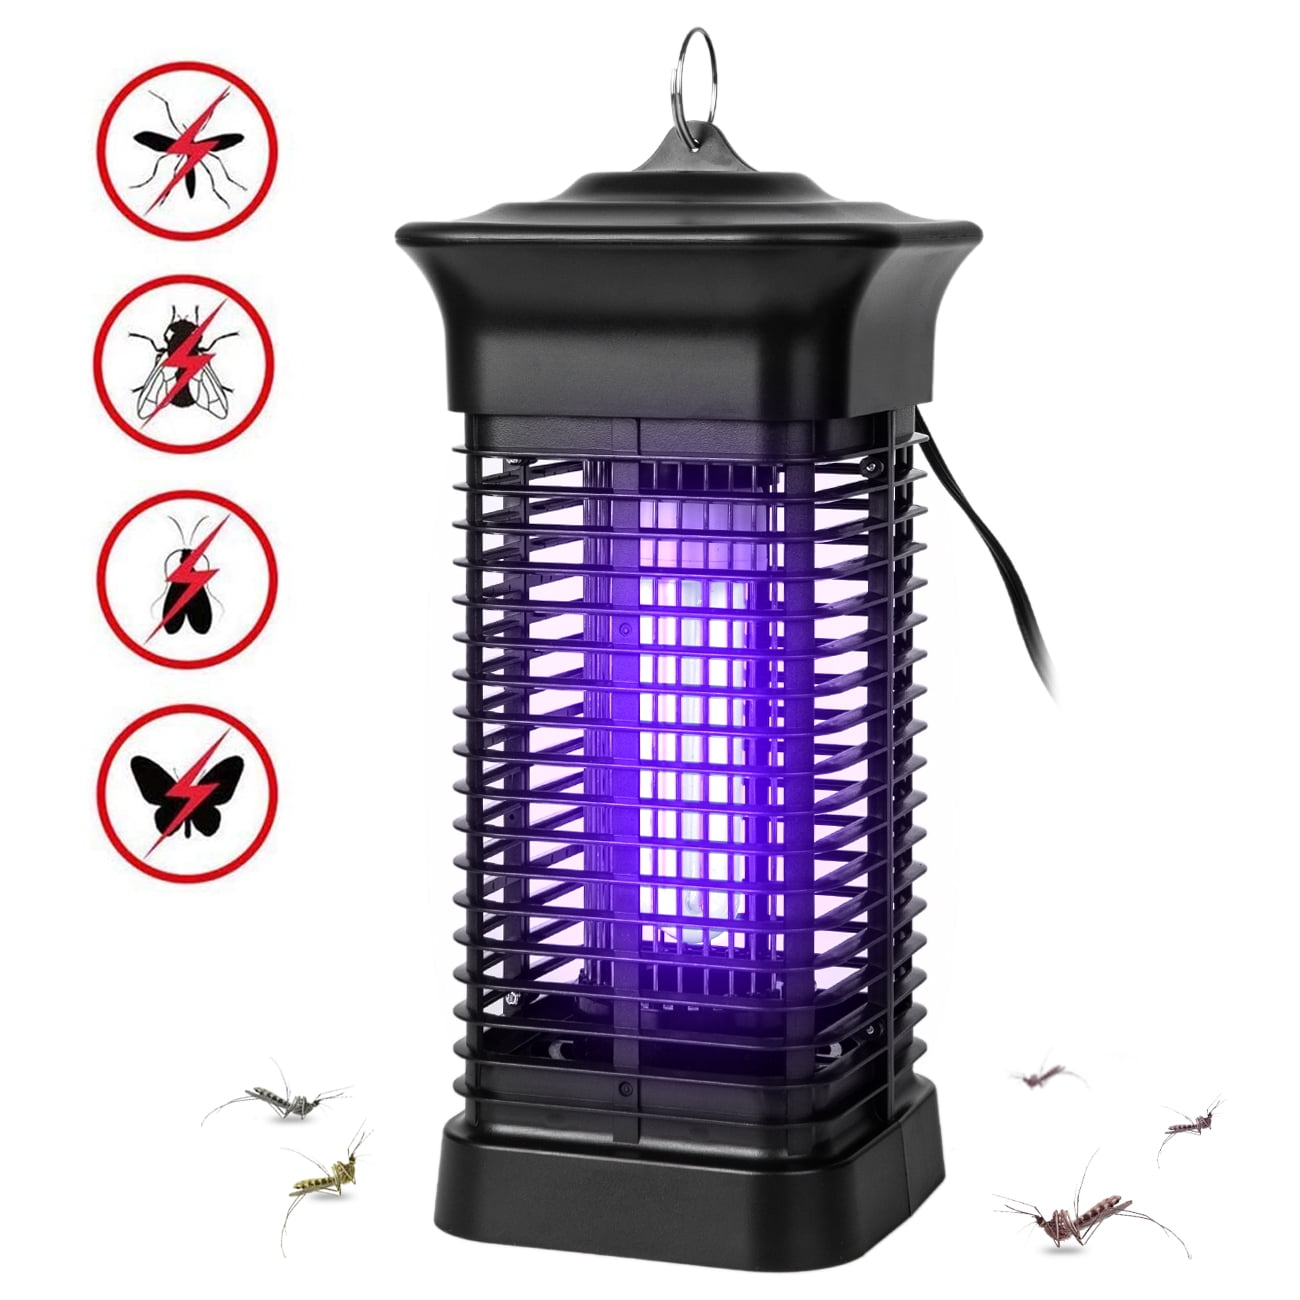 ELECTRONIC UV INSECT KILLER ELECTRIC ULTRAVIOLET MOSQUITO PEST FLY BUG ZAPPER;I1 